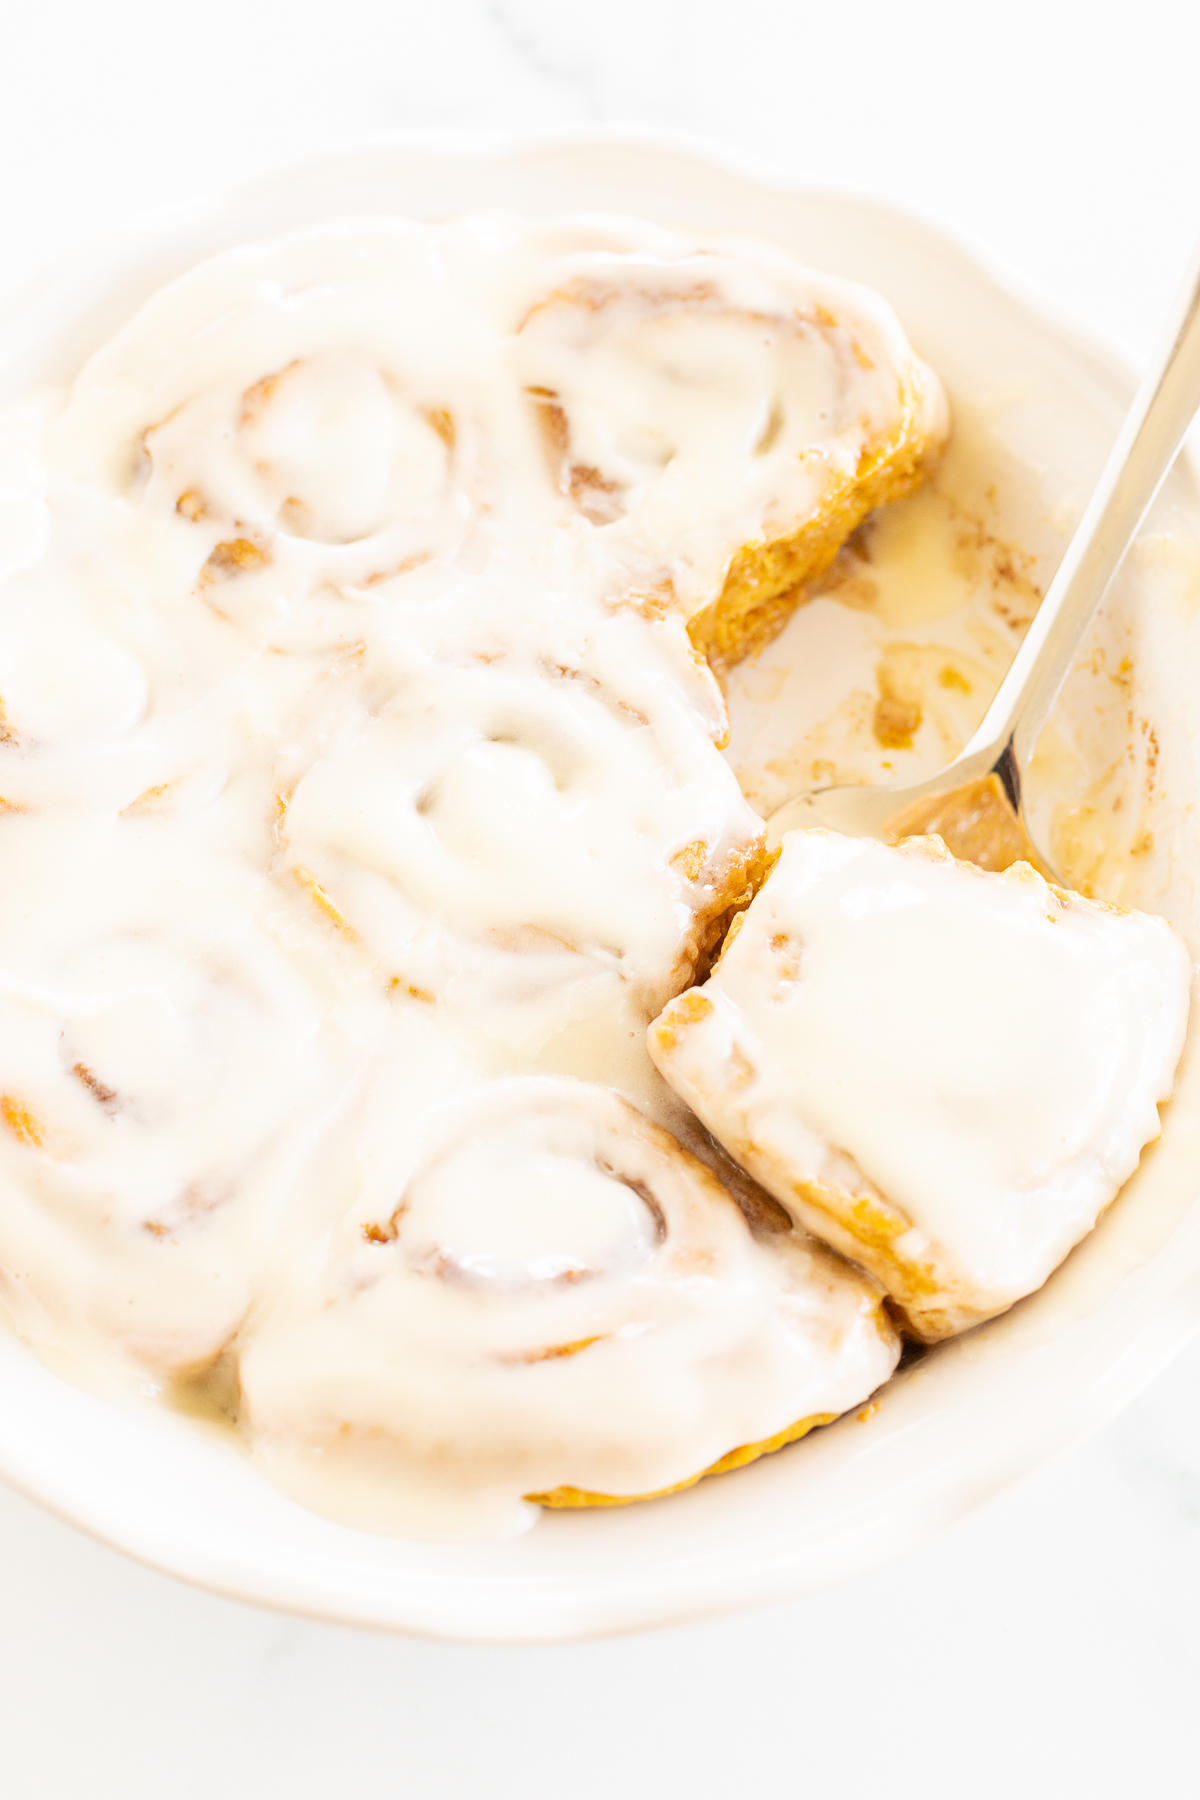 Pumpkin cinnamon rolls in a white bowl with icing.